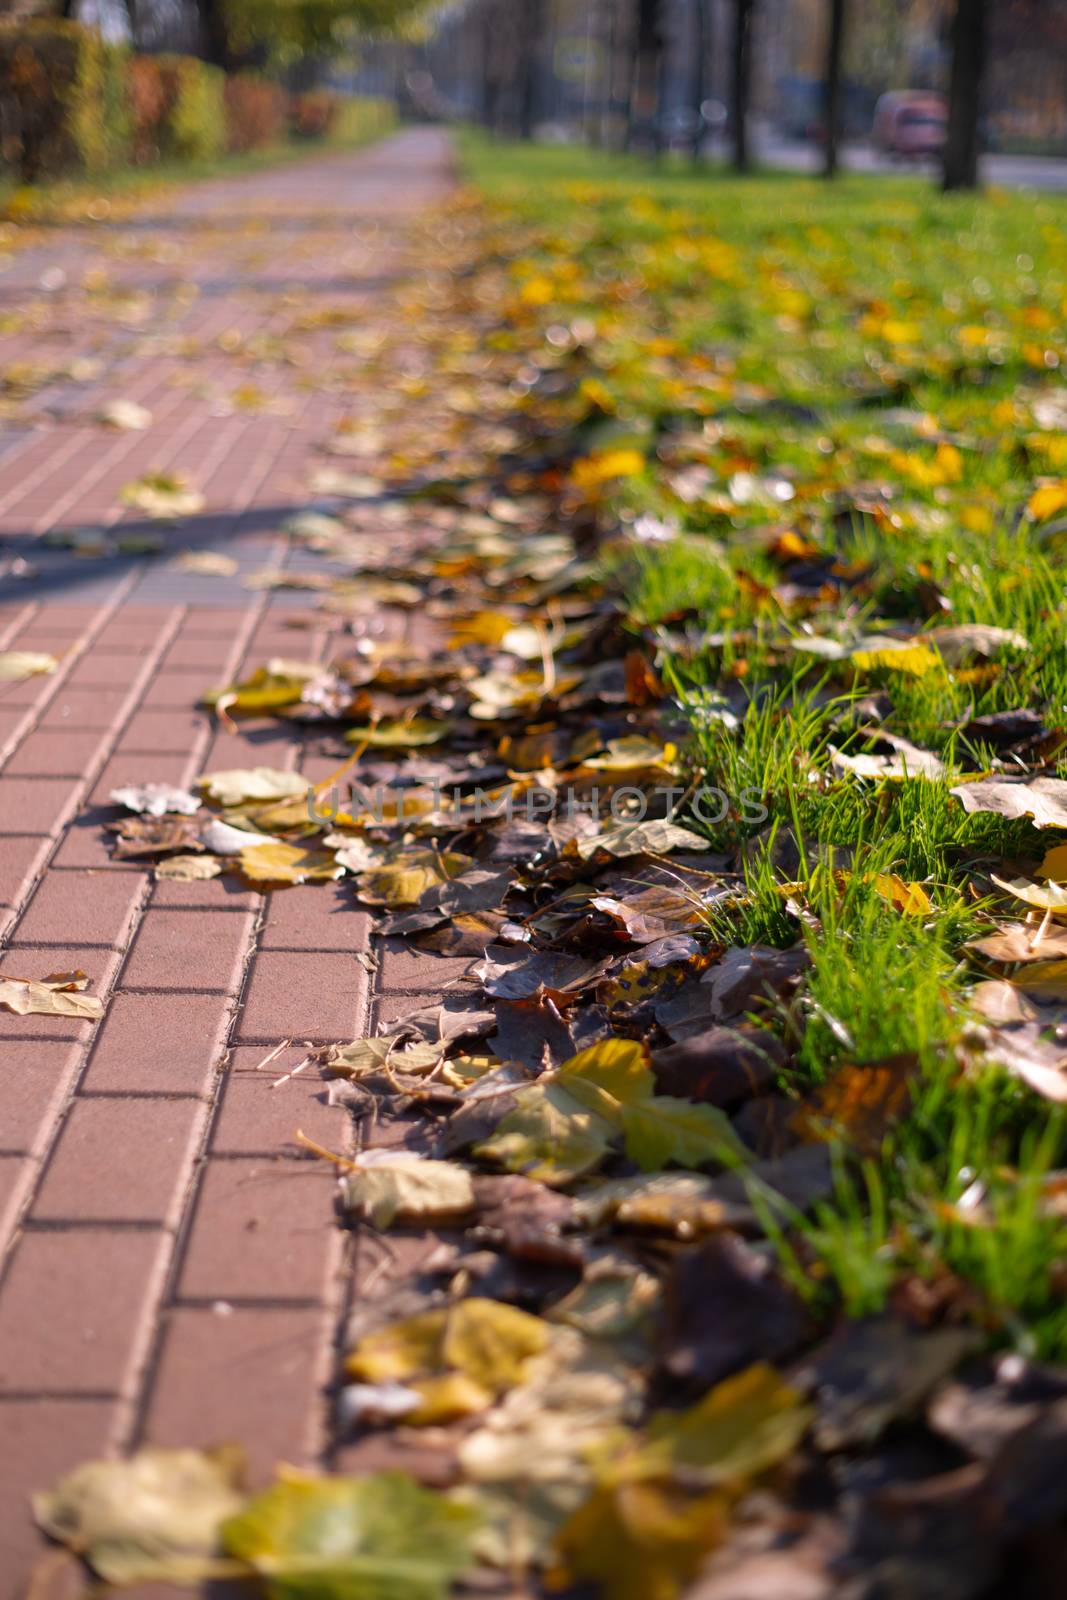 Autumn walking road with leaves at the curb. Green grass and orange leaves. by alexsdriver